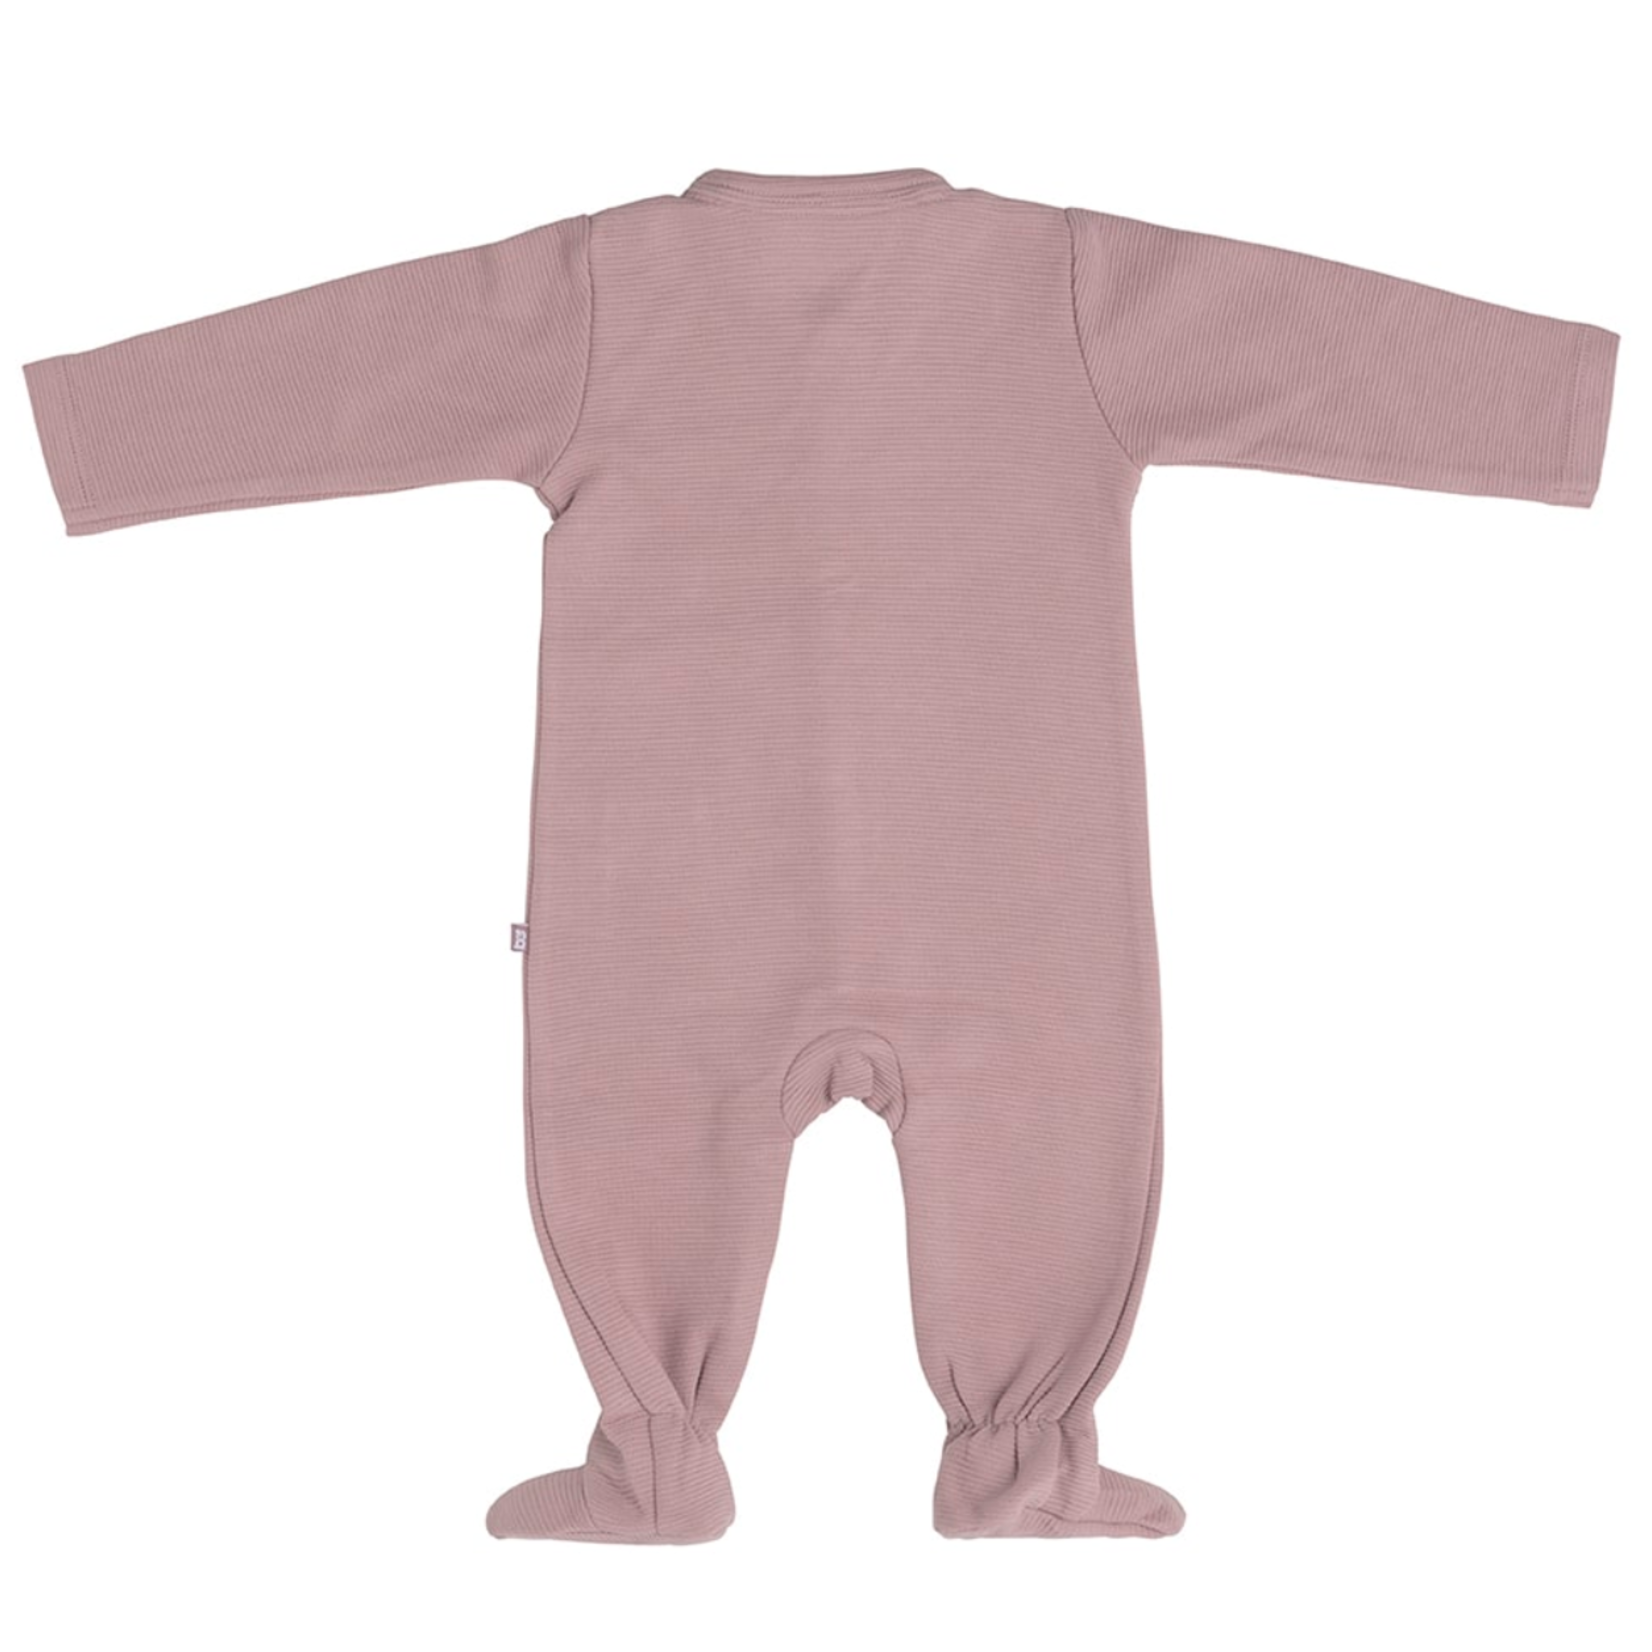 Baby's Only Baby's Only - Boxpakje met voetjes Pure oud roze